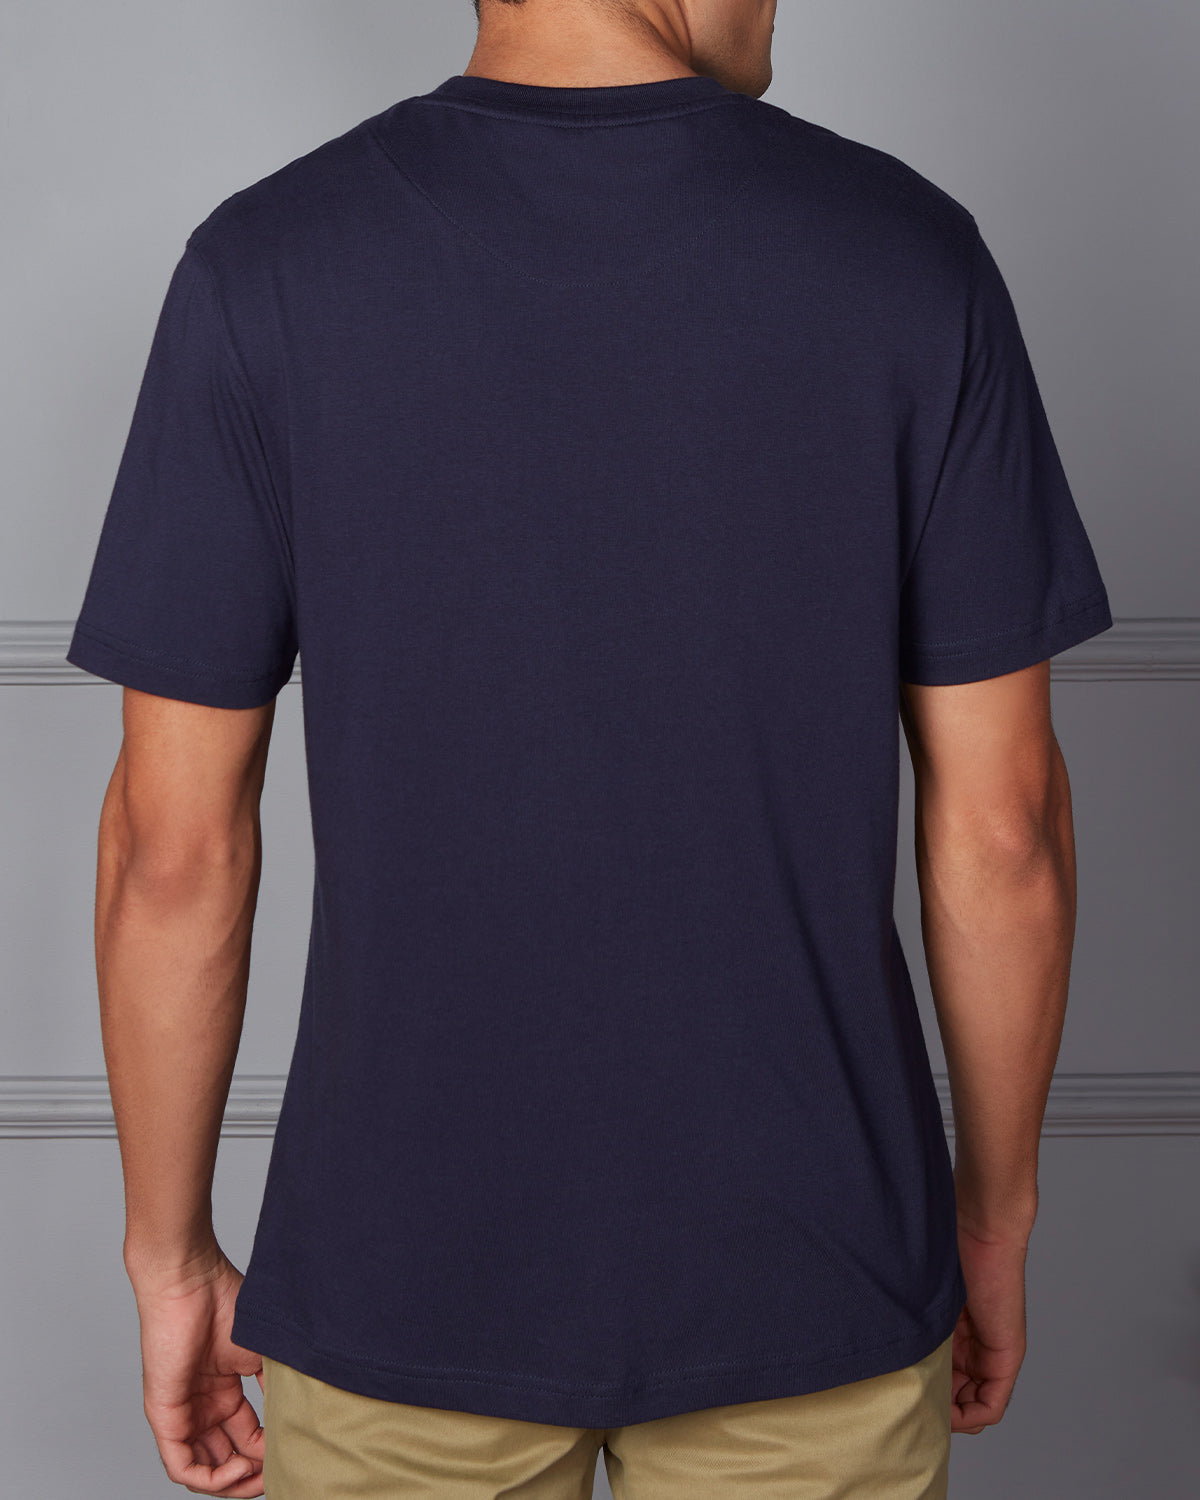 Luxe Square Pocket T-Shirt - Navy